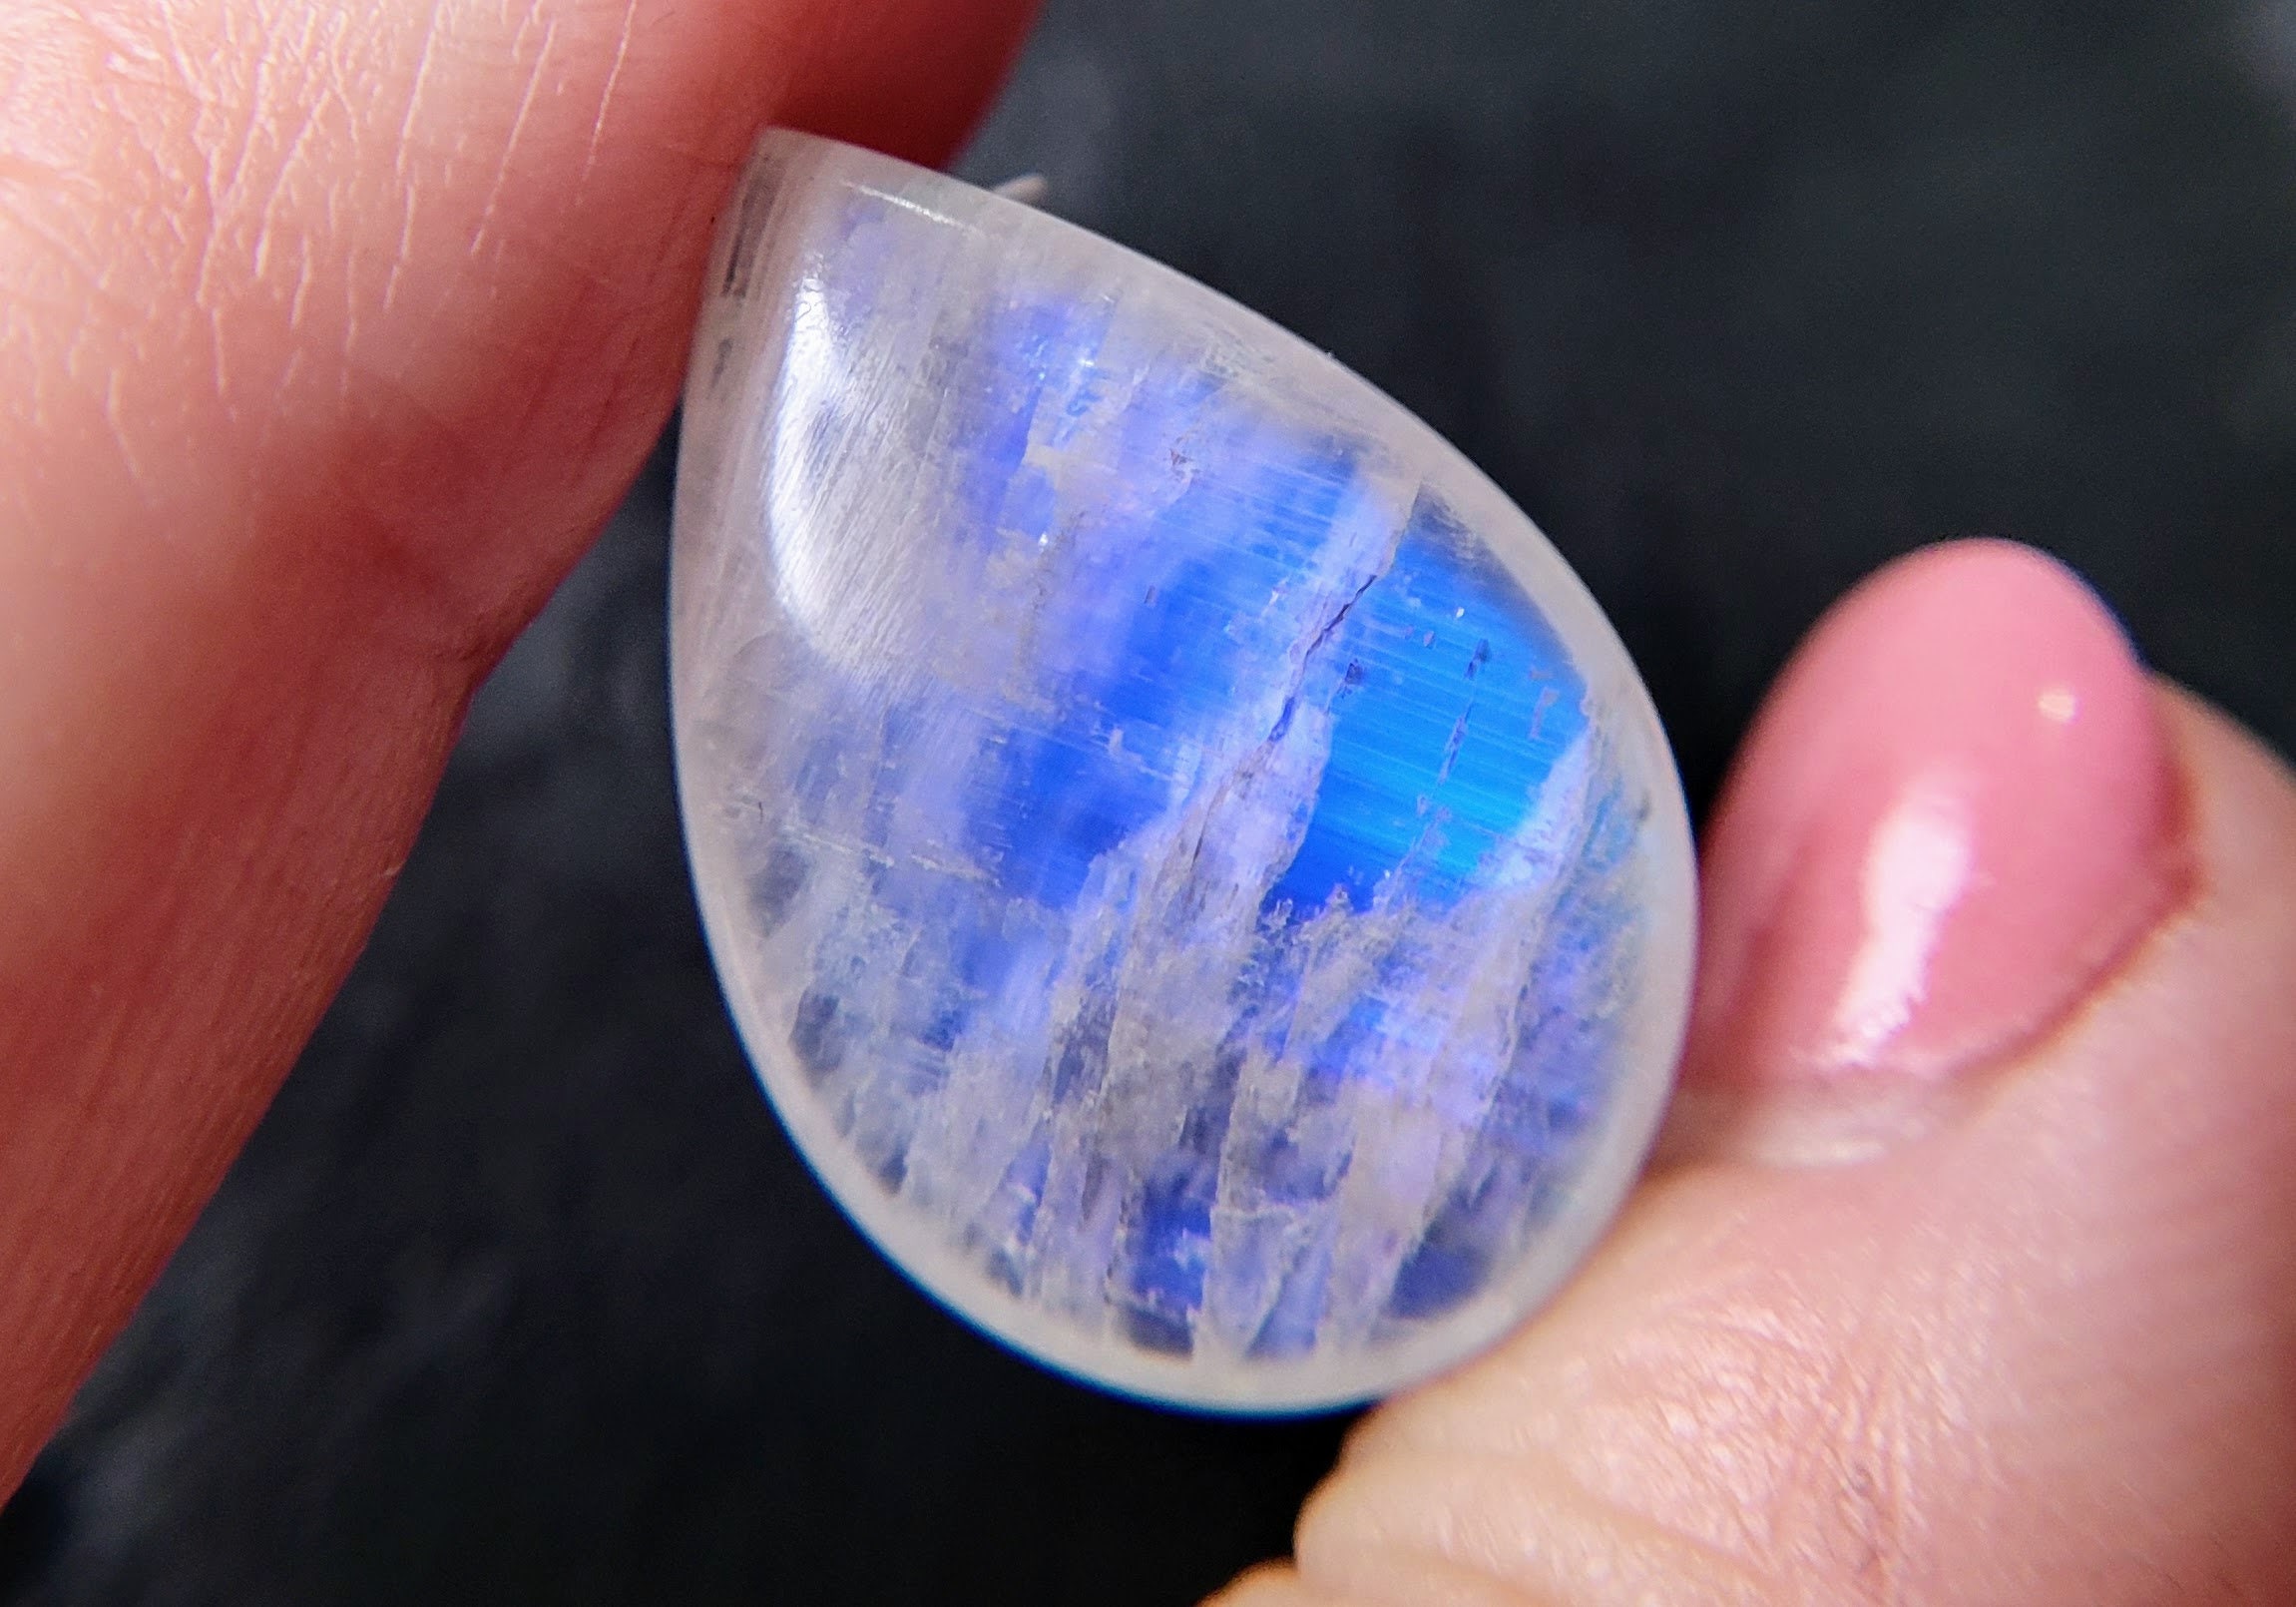 Vintage Art Glass Cabochon, Oval Cabochon For Jewelry Making, 33mm x 26.5mm